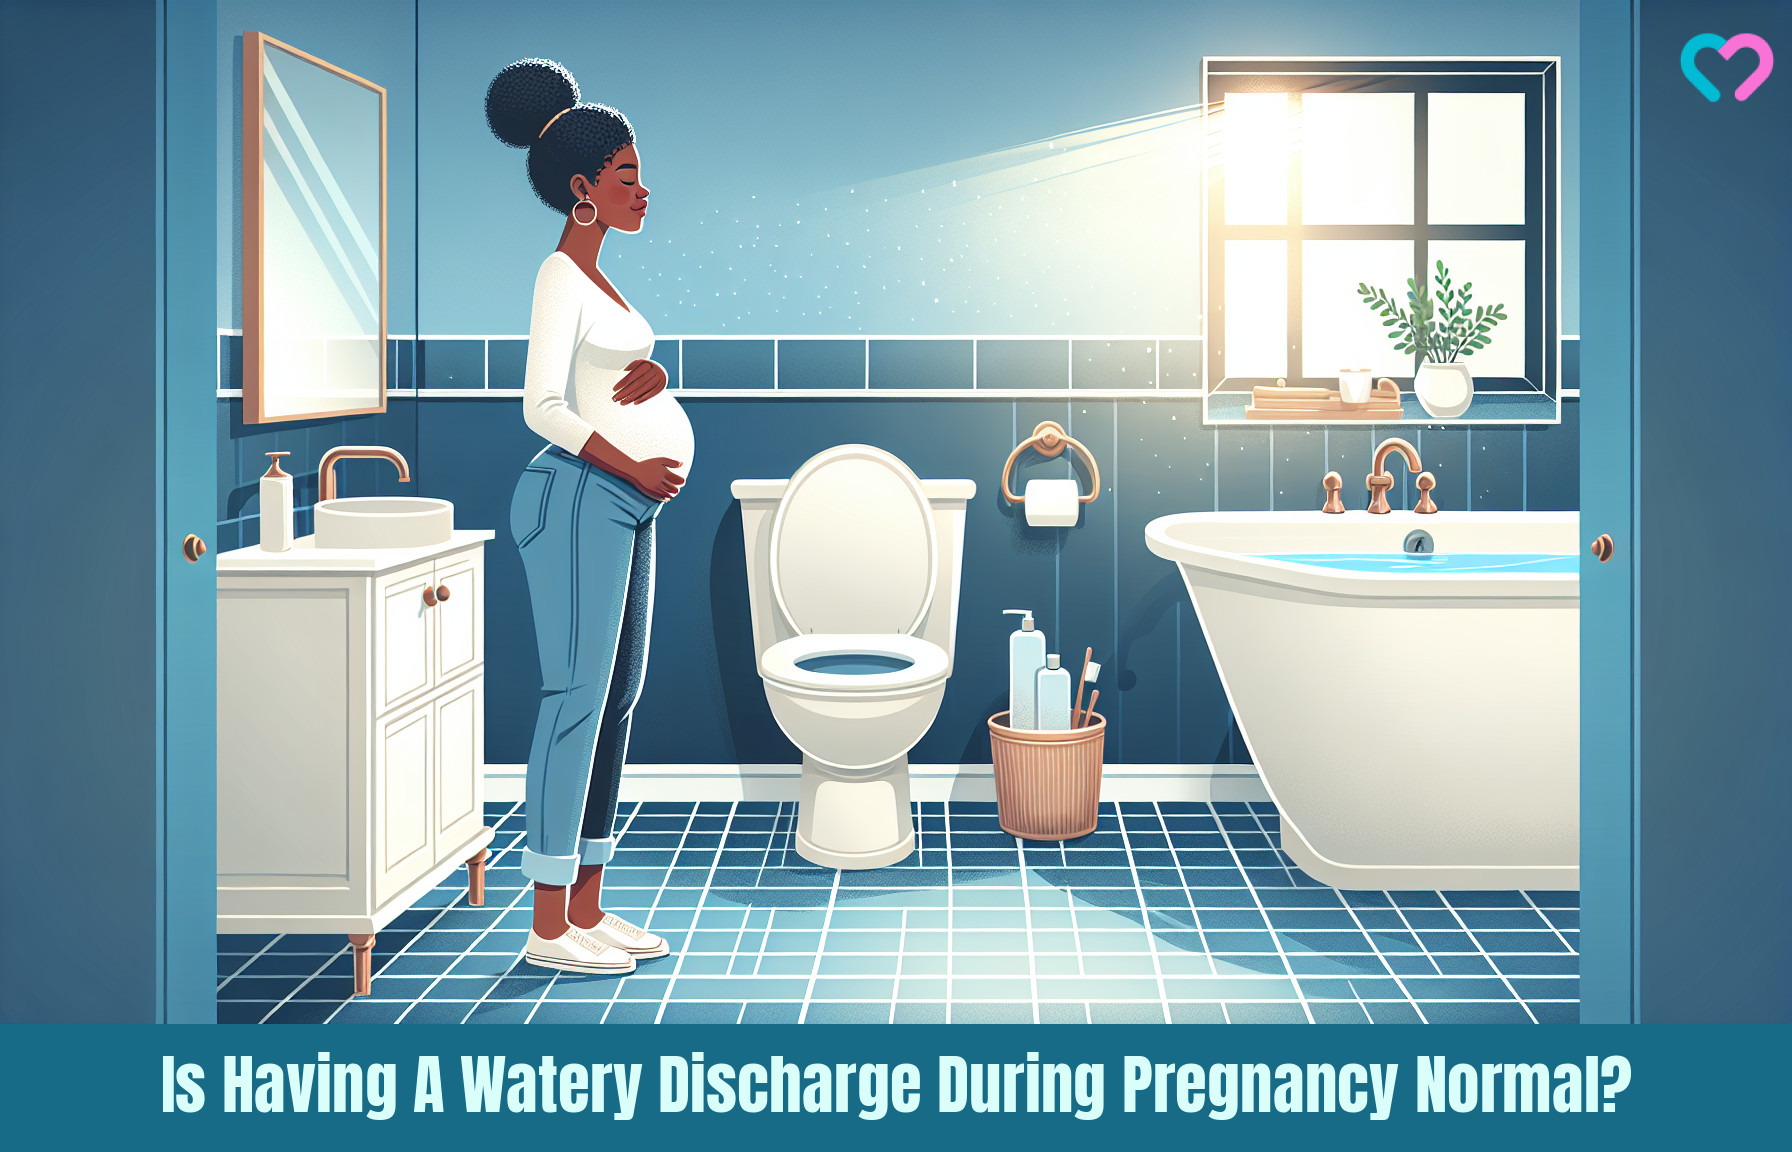 Watery Discharge During Pregnanc_illustration